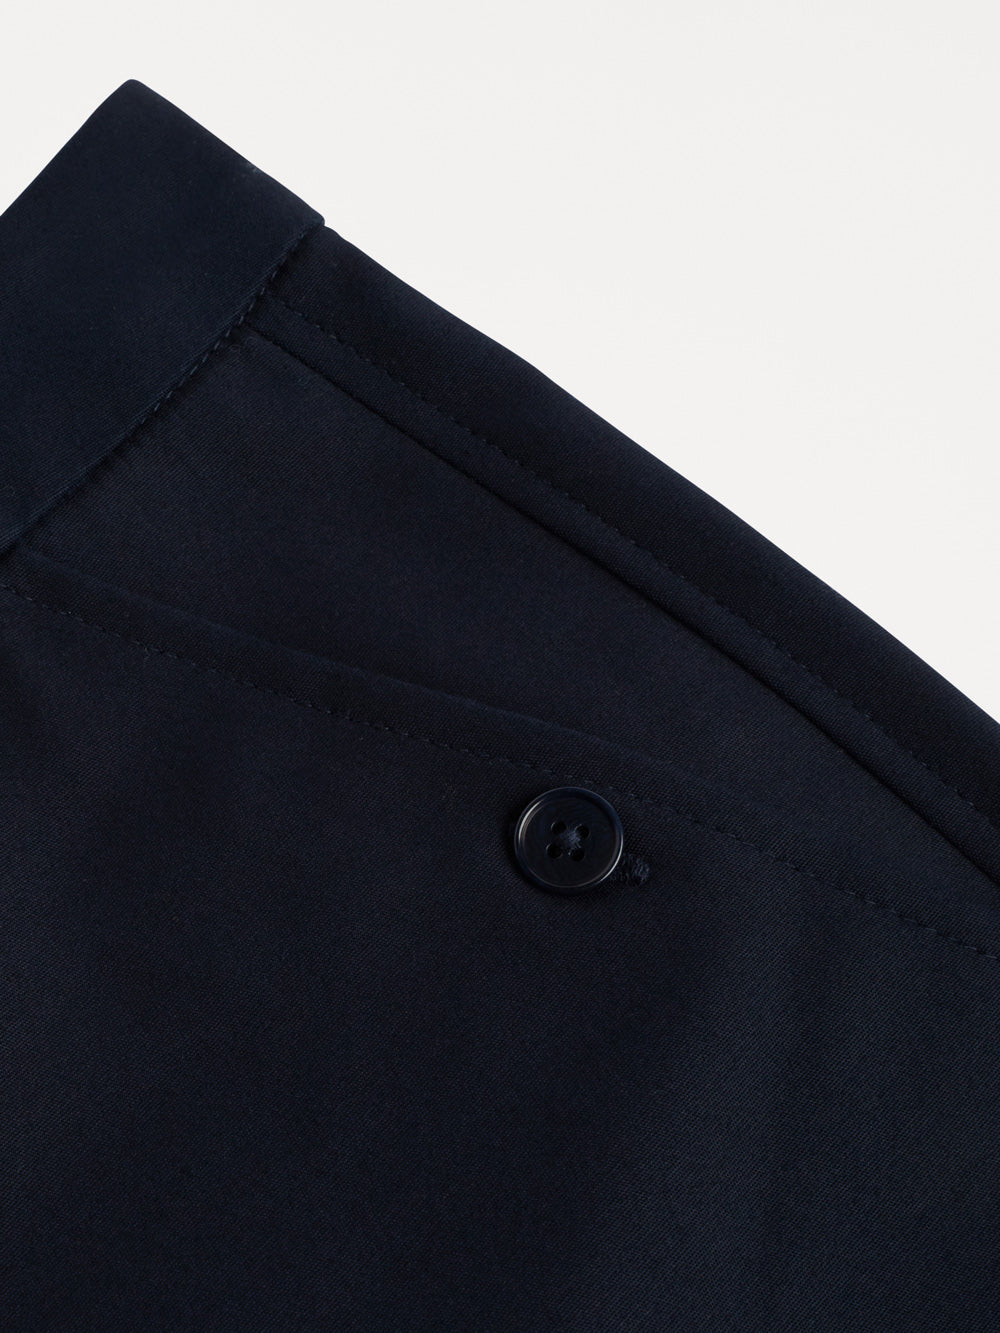 The Refined Stretch Cotton Trouser